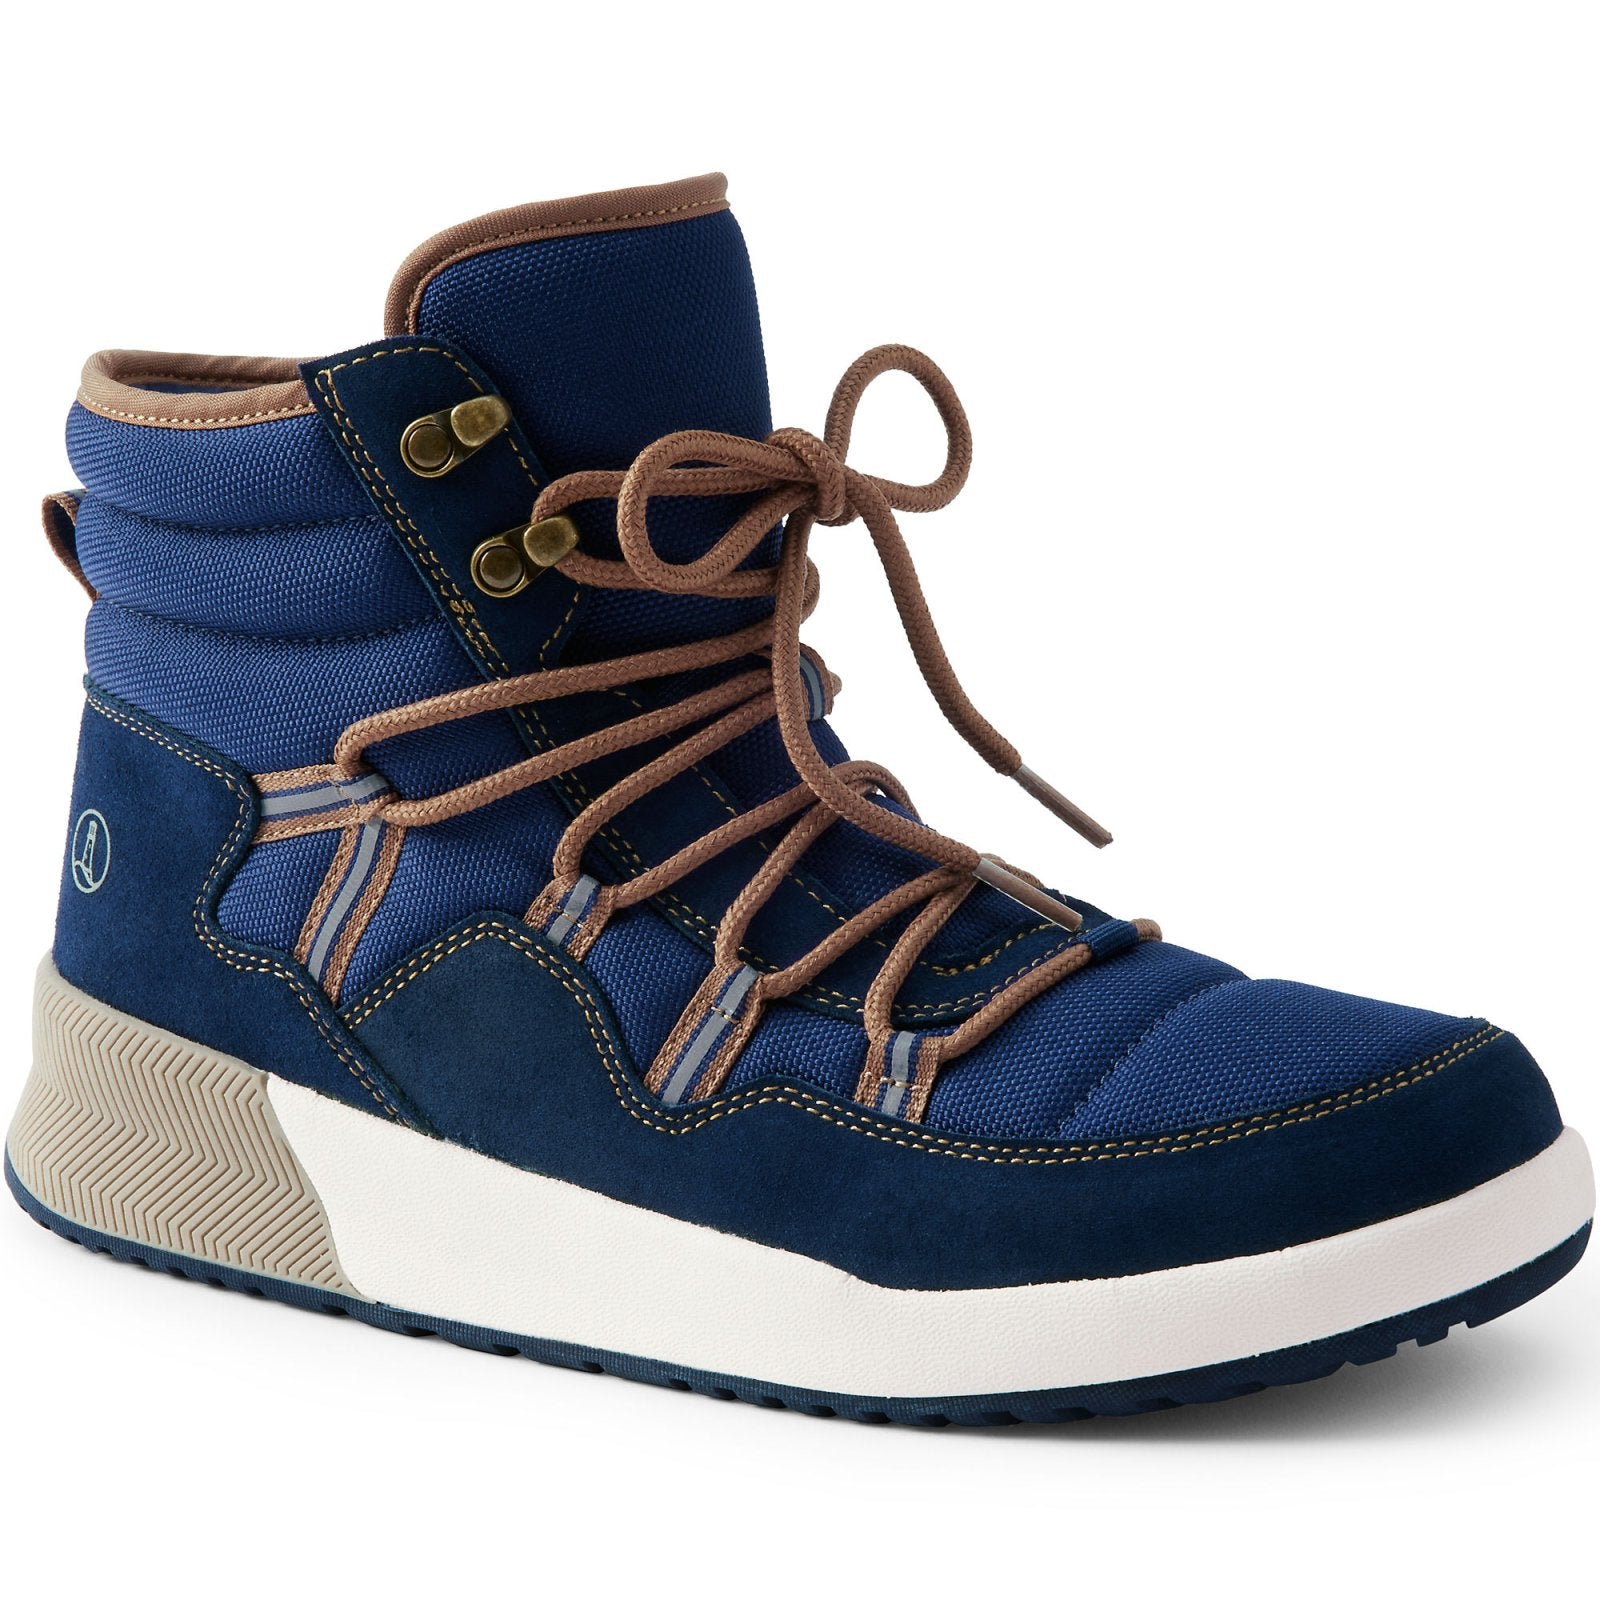 Land's End Men's Transitional Insulated Winter Snow Boots